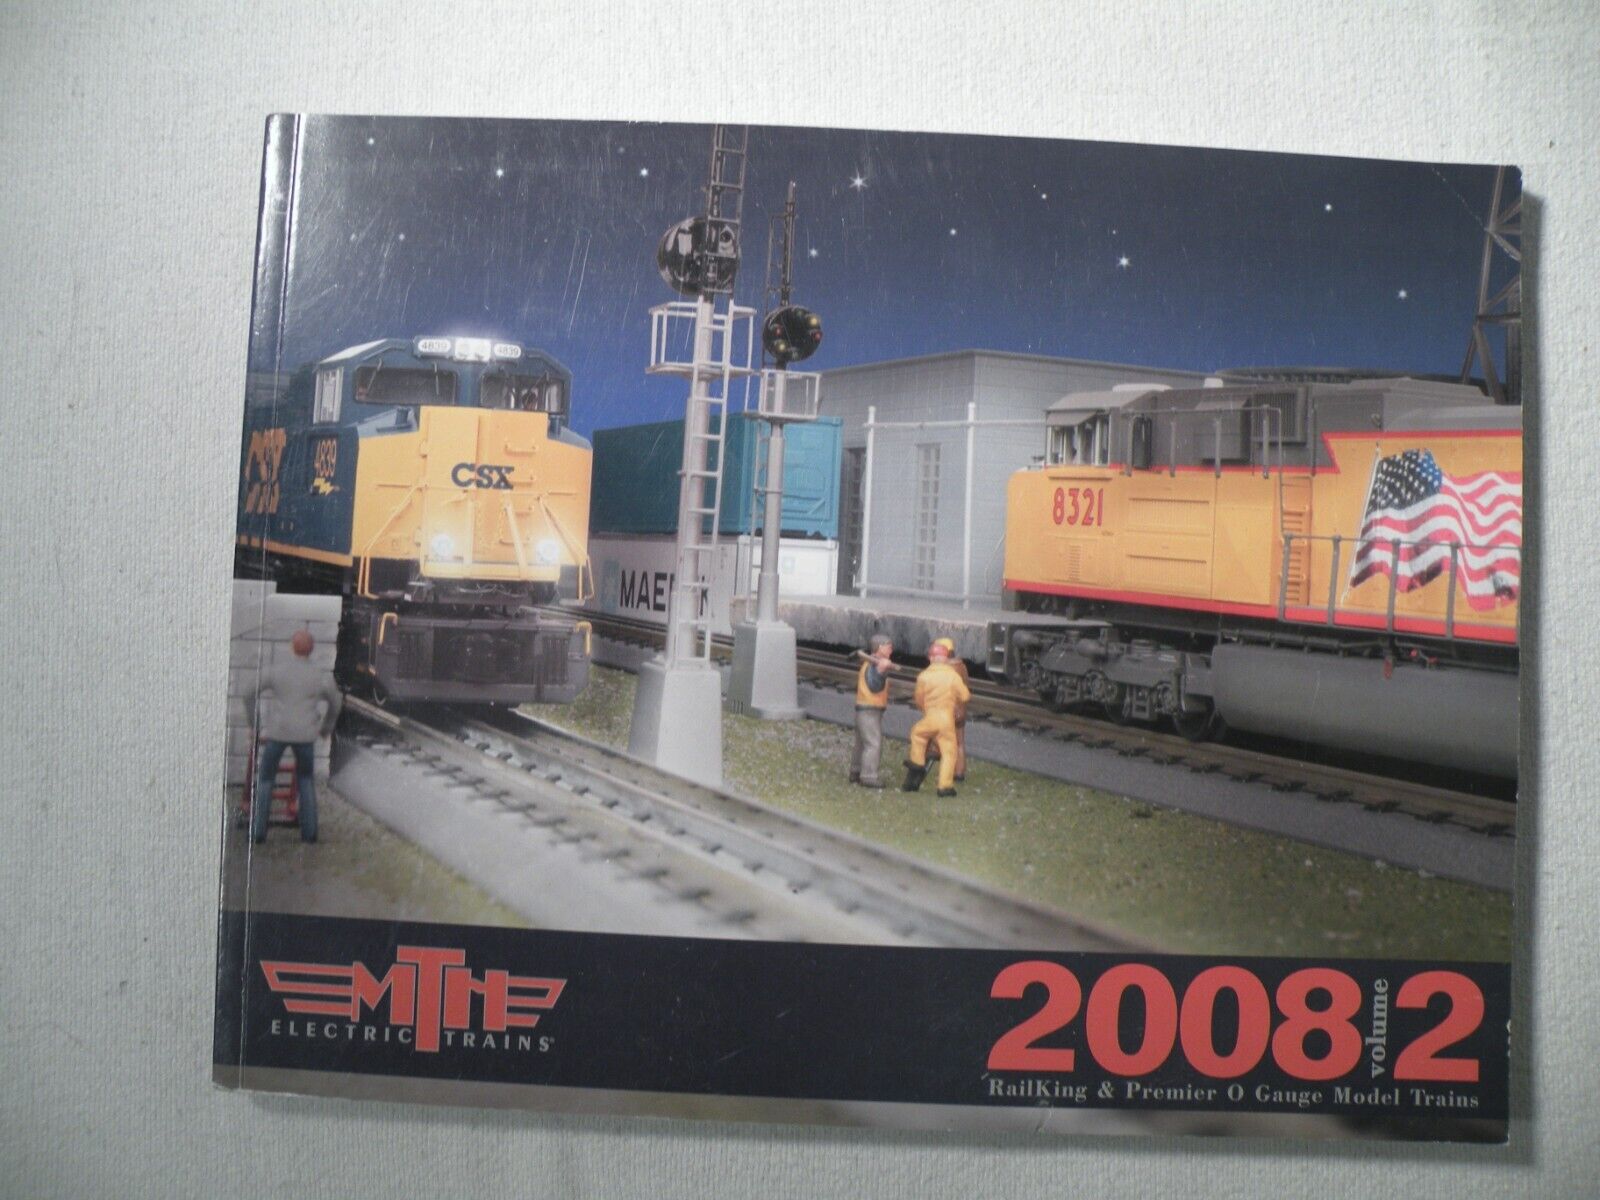 MTH Electric Trains Catalog - 2008 Volume 2 - NOS - Fast Shipping